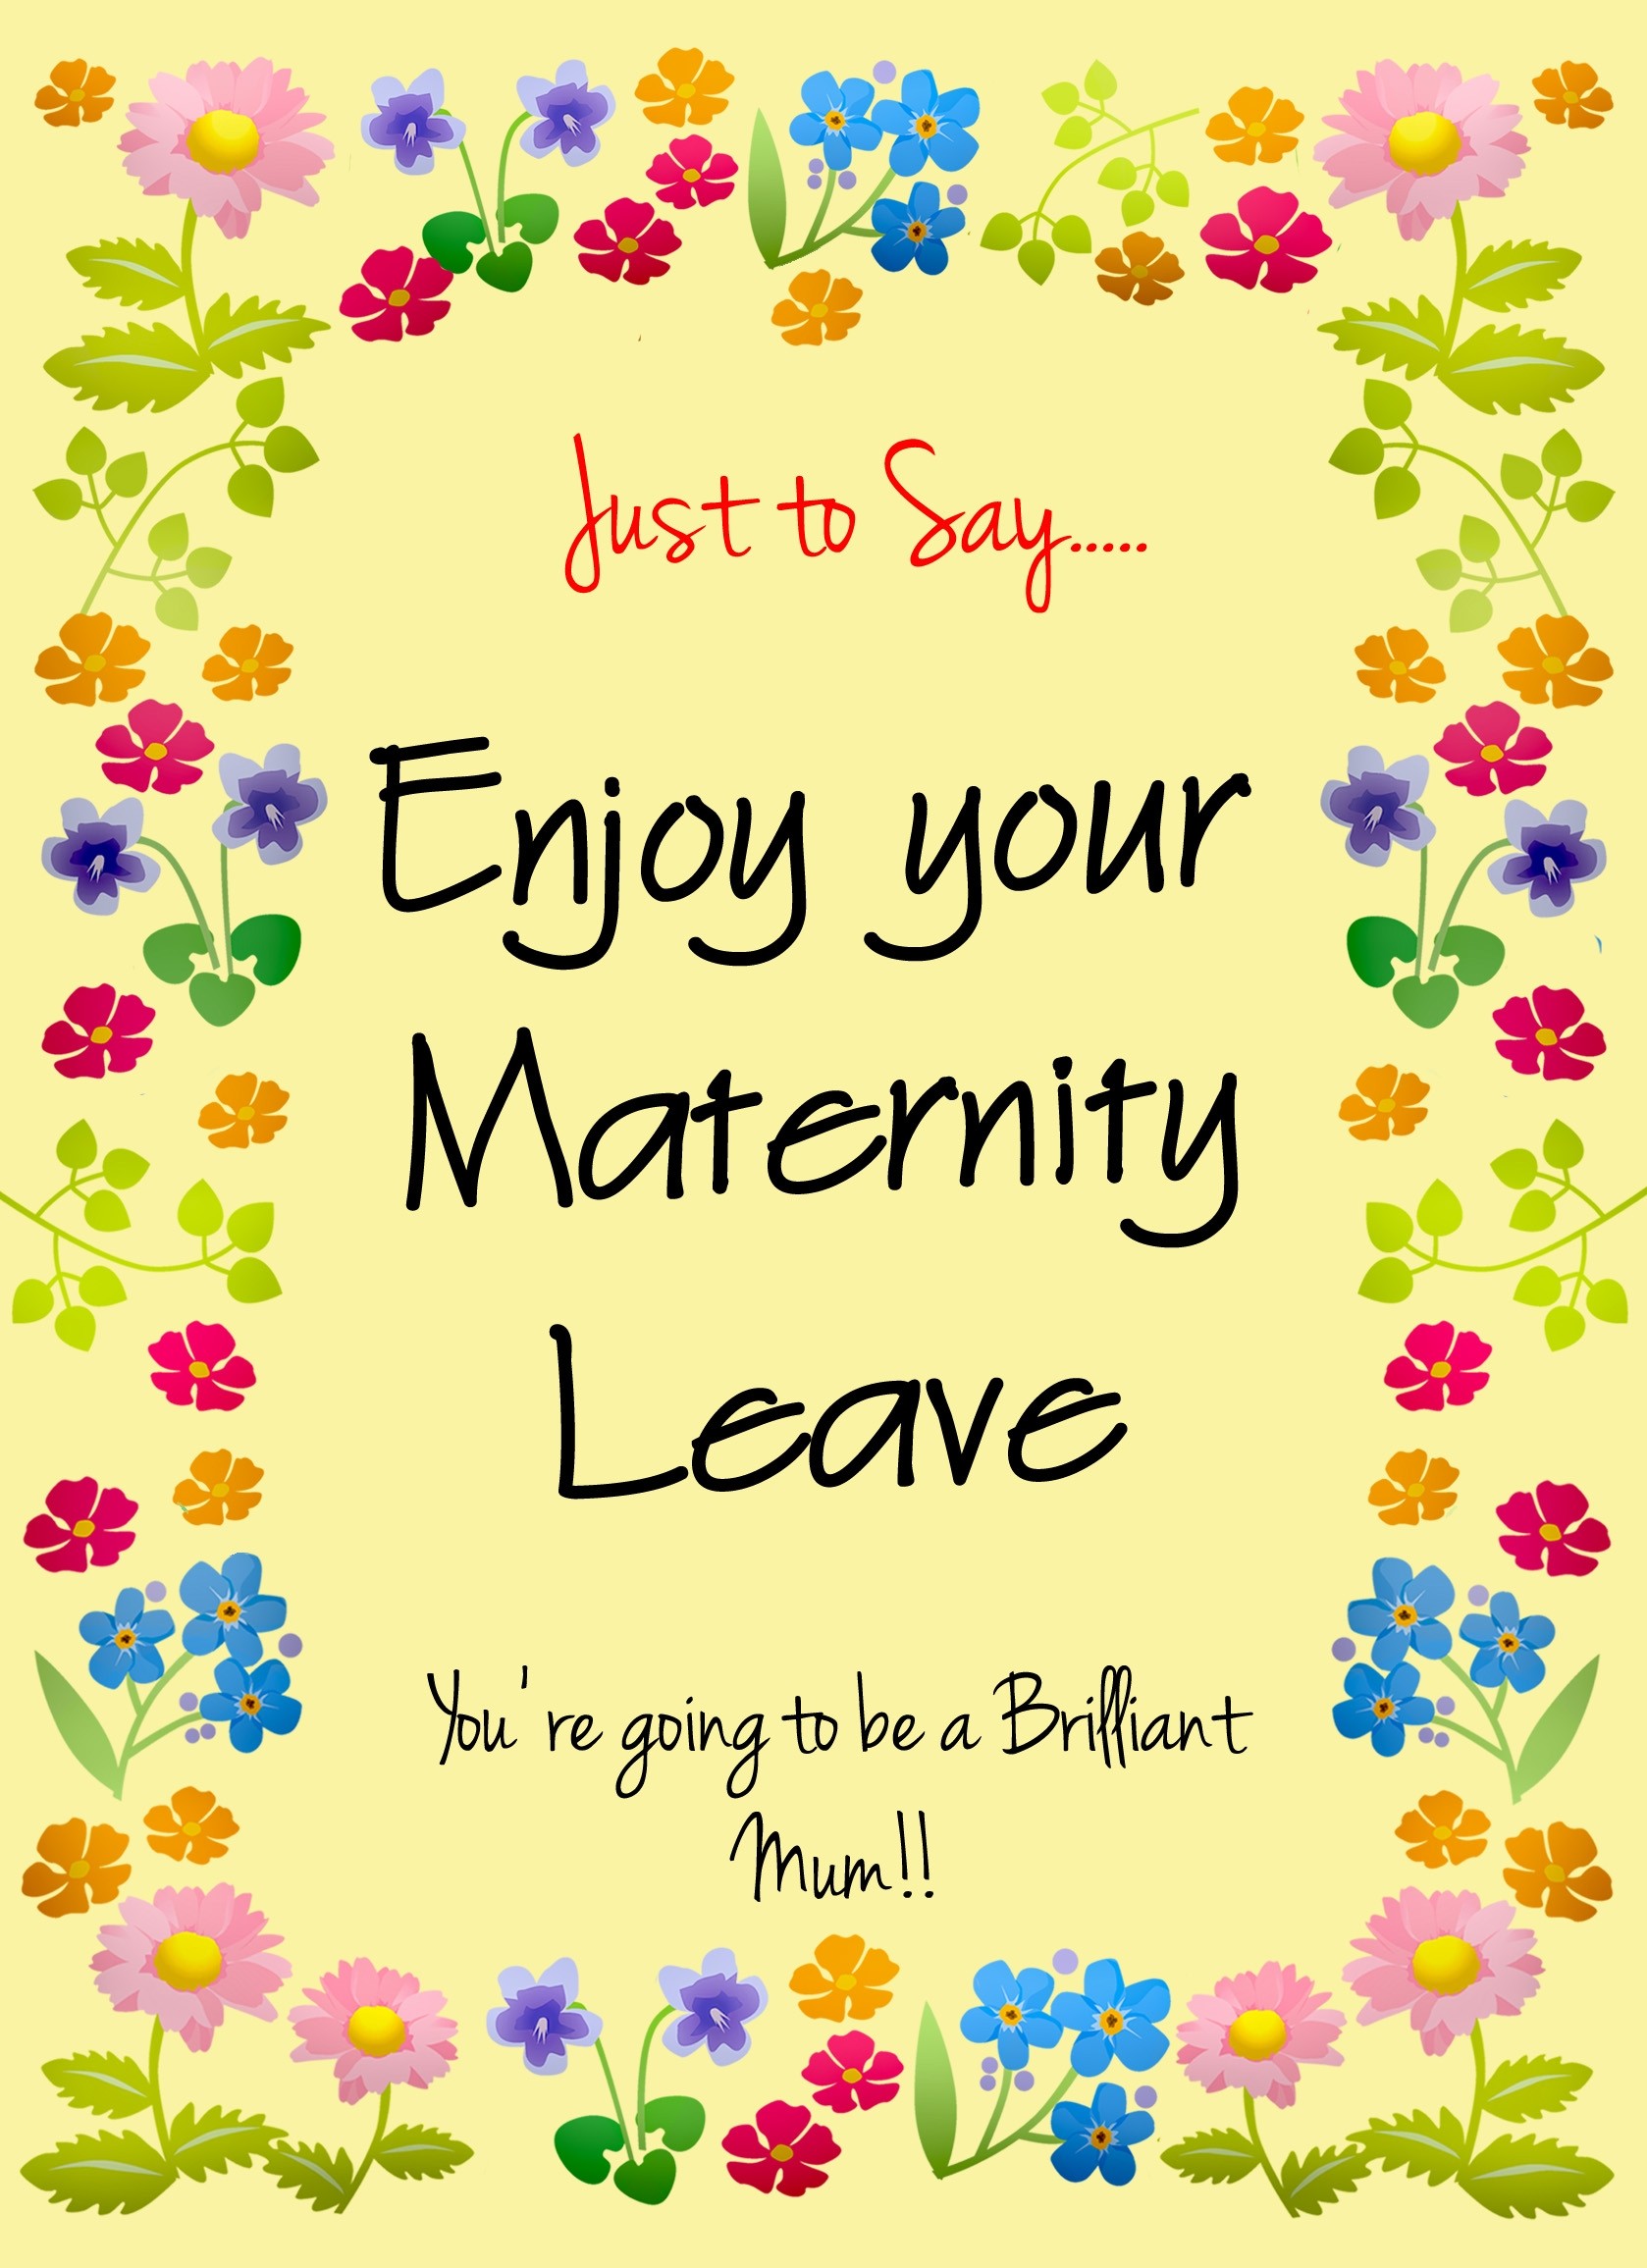 Maternity Leave Baby Pregnancy Expecting Card (Mum)